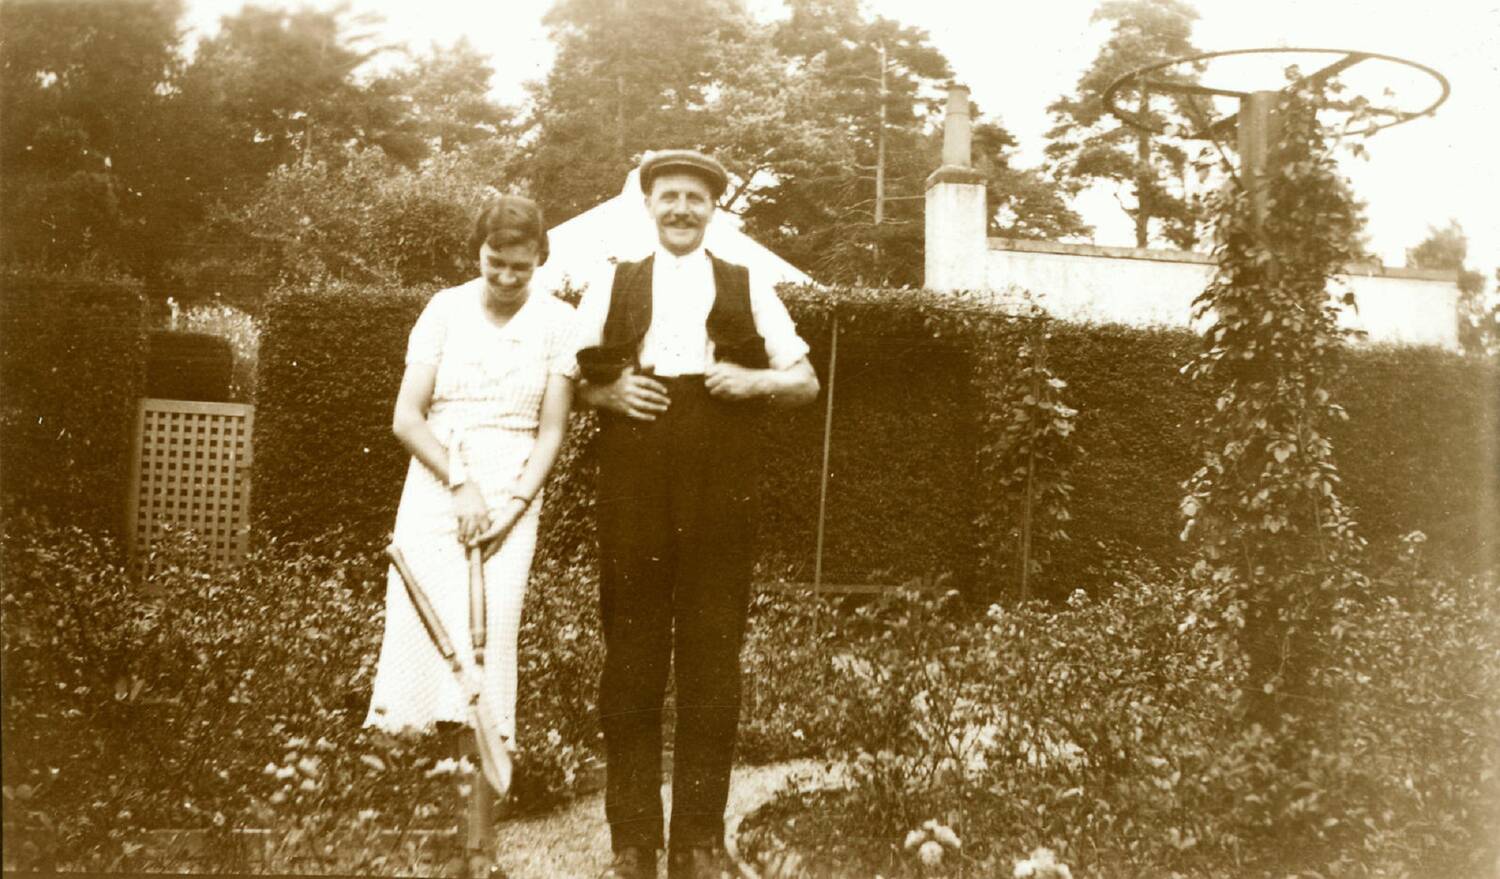 A black and white photo of a man and a woman standing side by side on a narrow path in a rose garden. The woman is on the left - she wears a white dress, holds a very large pair of shears and is looking down at her feet. The man is on the right - he smiles directly at the camera and is holding his dark waistcoat over his white shirt. He also wears a flat cap.